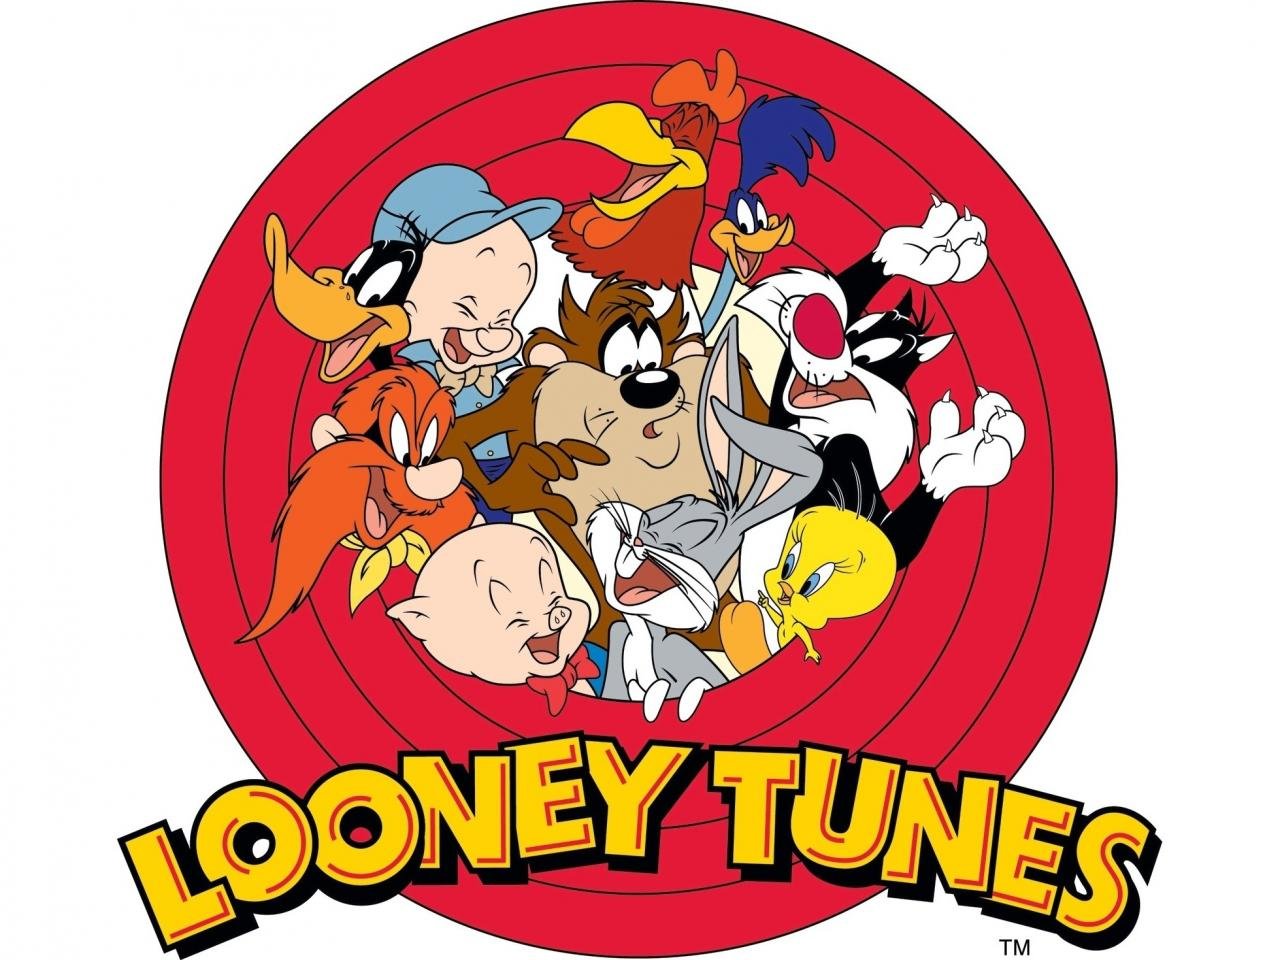 kyrie irving looney tunes